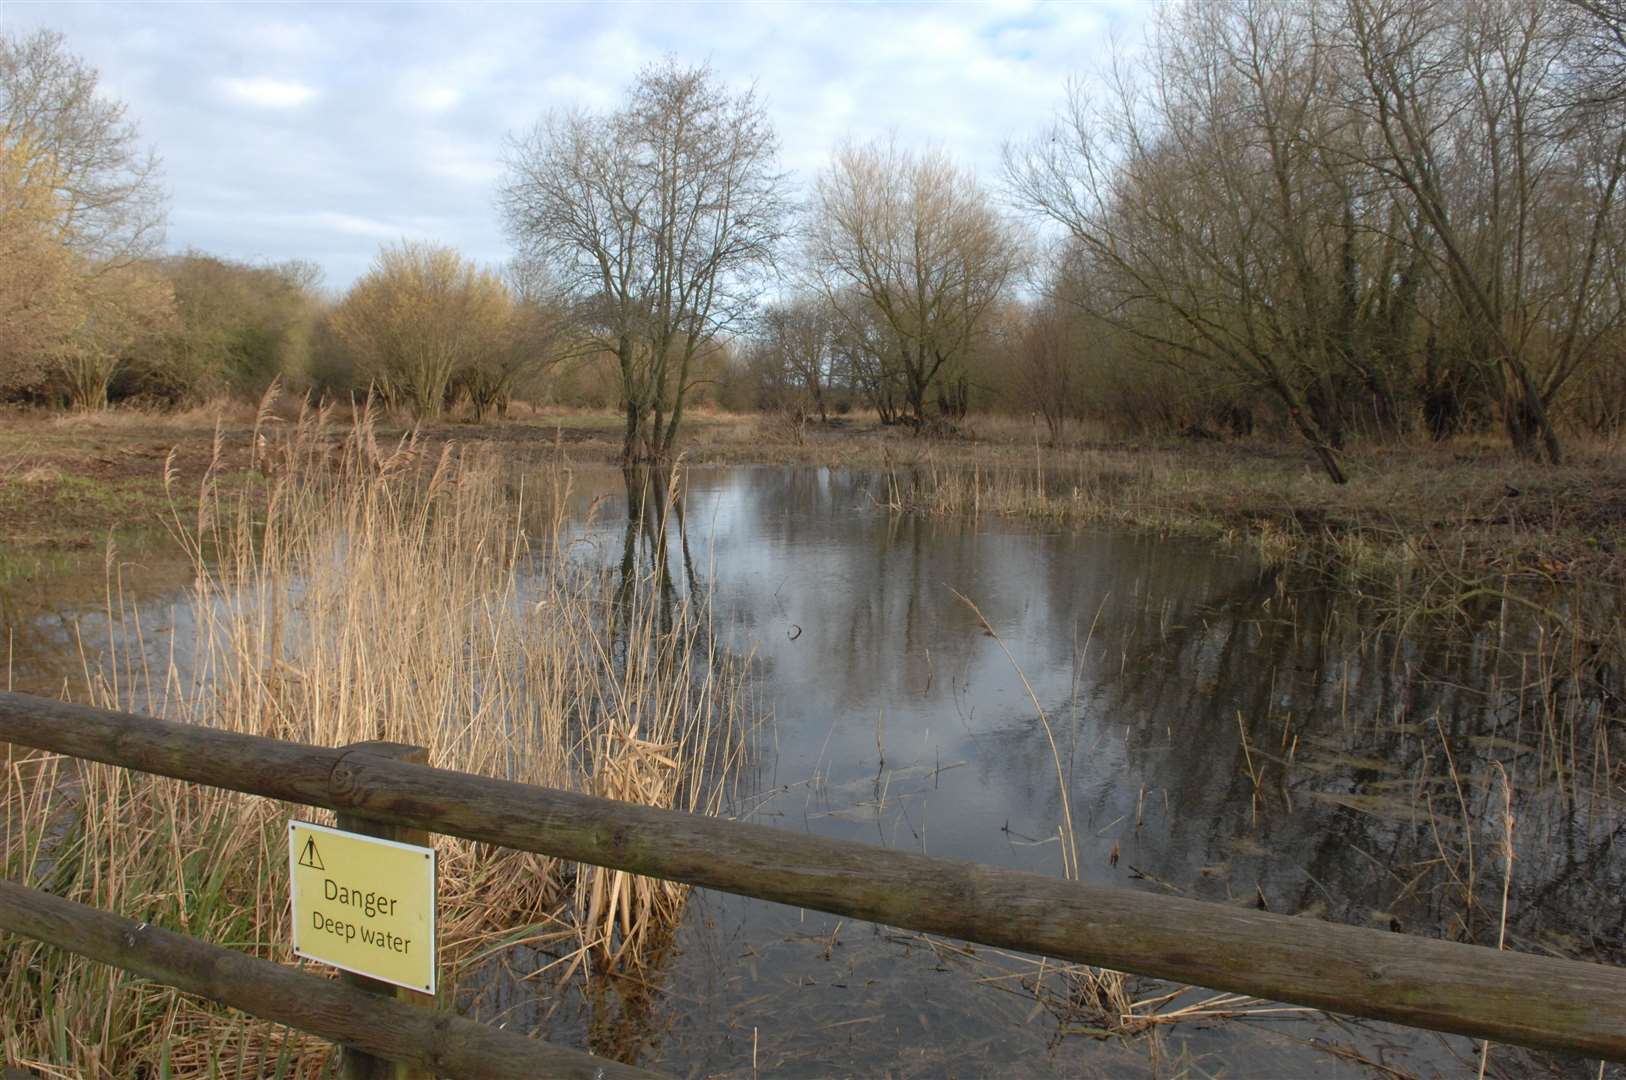 Stodmarsh nature reserve has been polluted with high levels of nitrogen and phosphorus from waste water